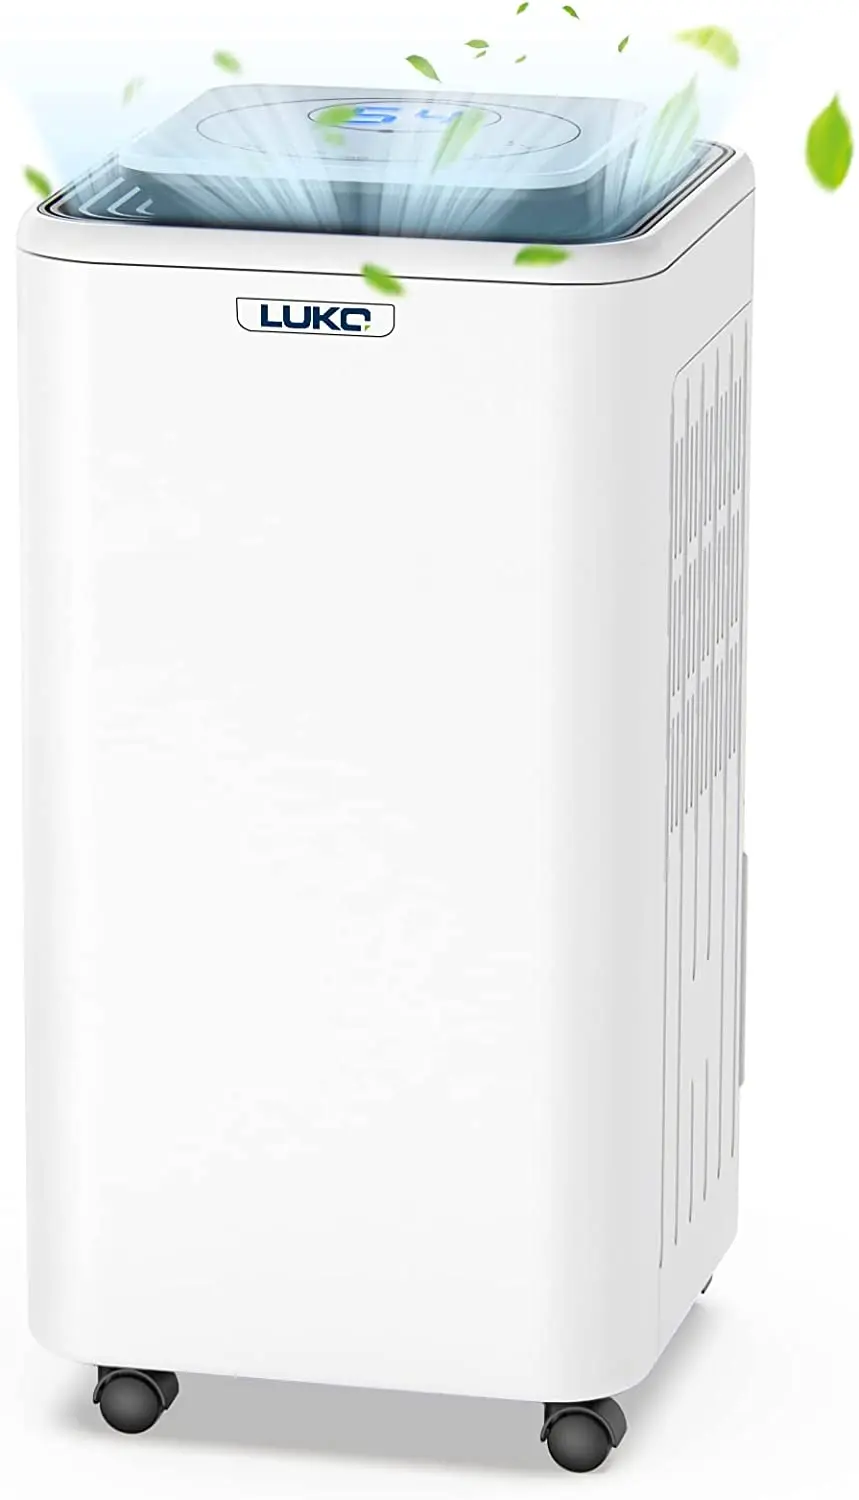 LUKO 2500sq.ft Dehumidifiers for Basements with Drain Hose Drying Home Moisture Ultra Quiet Dehumidifiers for Bedroom Keep Humidity Reaches to 40% Auto Defrost Includes 68oz Water Tank 2 Side Filters 